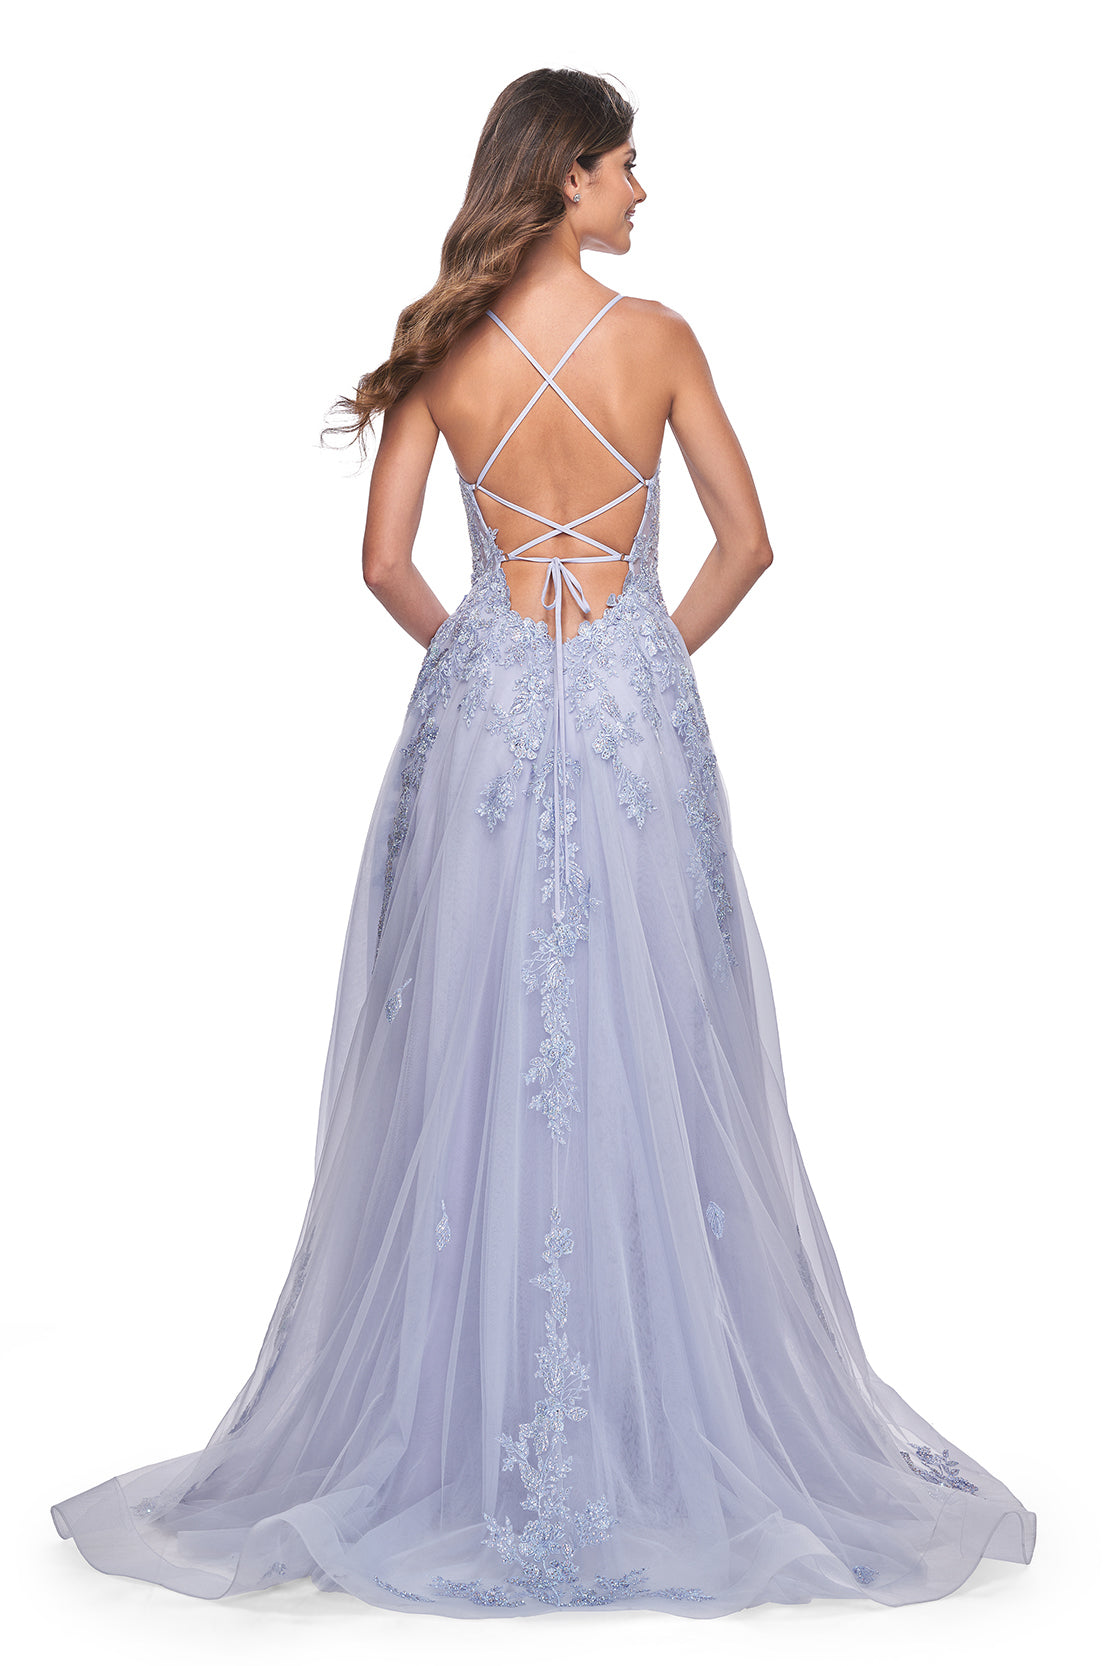 La Femme 32062 A-Line Lace Applique Prom Gown - An enchanting A-line gown featuring a deep v-neck, high slit, lace applique embellished bodice, lace detailed hem, and a charming tie-up back. Perfect for prom or a quinceañera. Model is wearing Light Periwinkle.